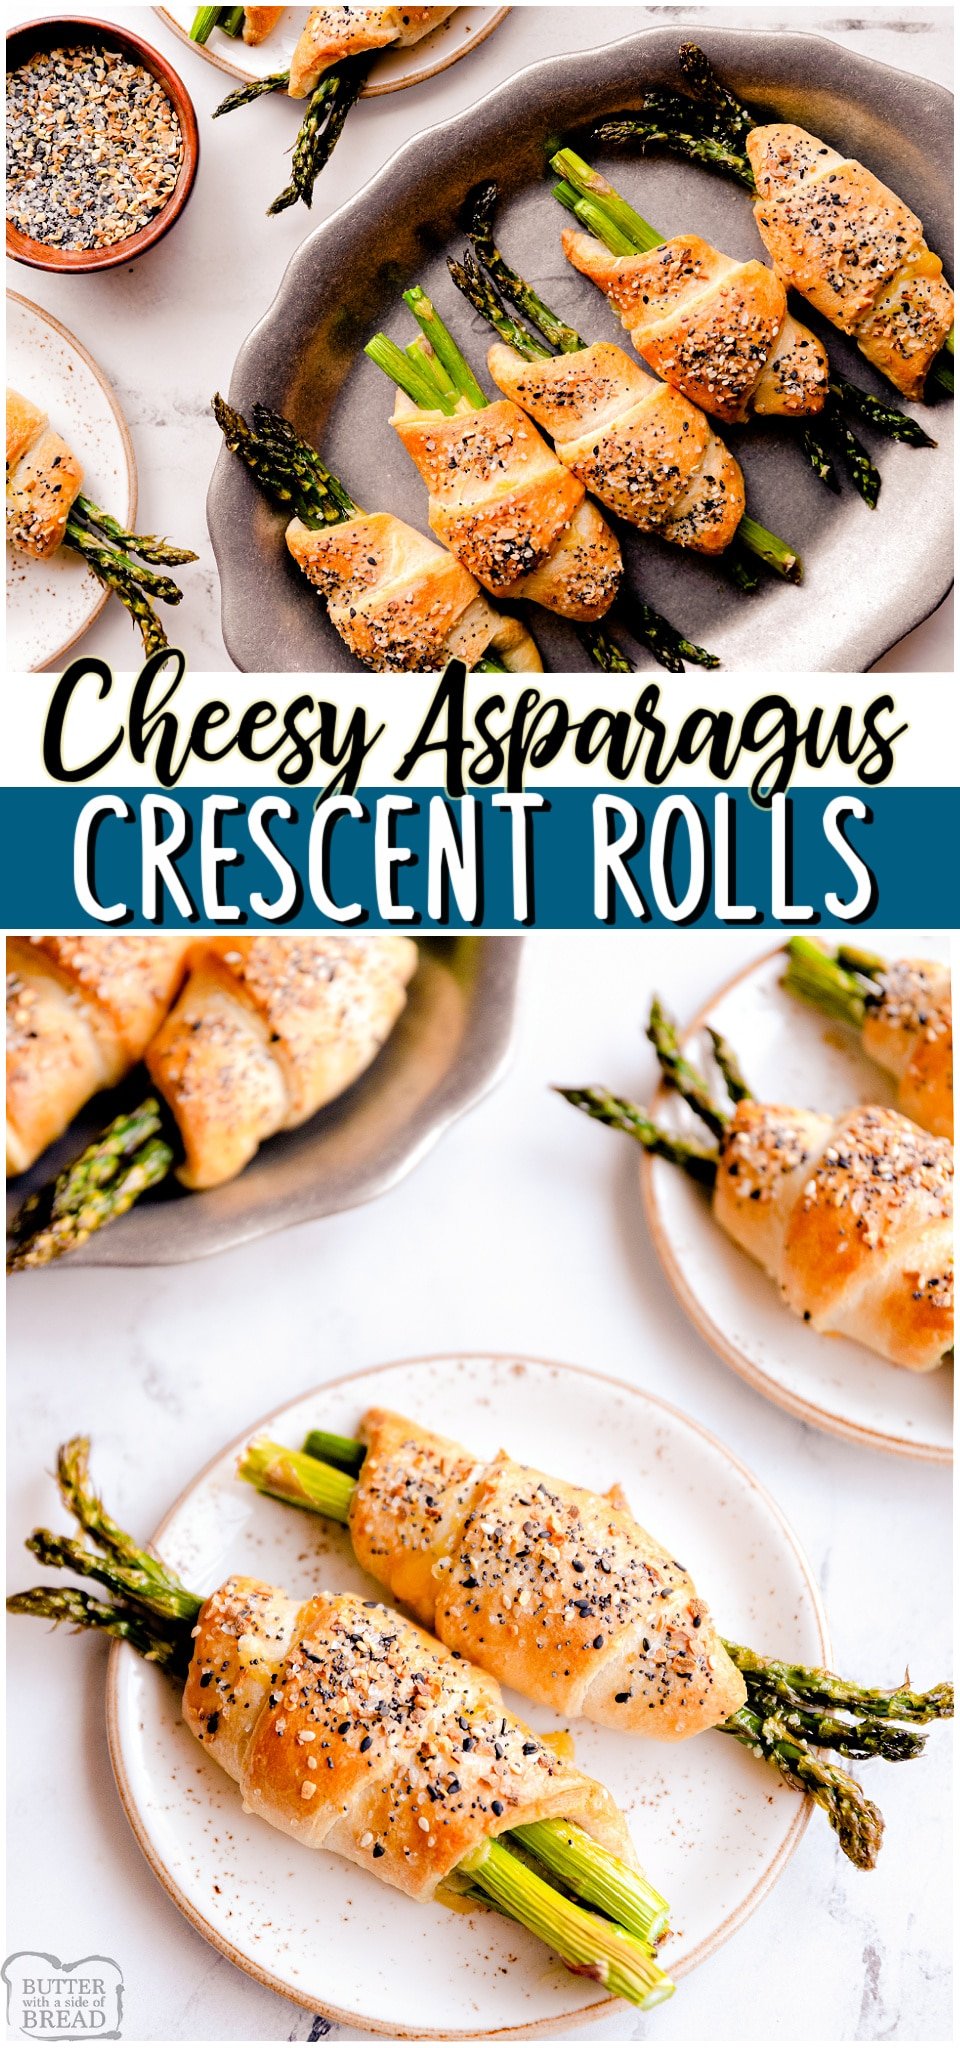 Asparagus crescent rolls are a deliciously simple appetizer made with fresh asparagus, crescent rolls & cheese! Flavorful vegetable dish that's perfect with dinner or at a party! #asparagus #crescentrolls #cheesy #appetizer #easyrecipe from BUTTER WITH A SIDE OF BREAD